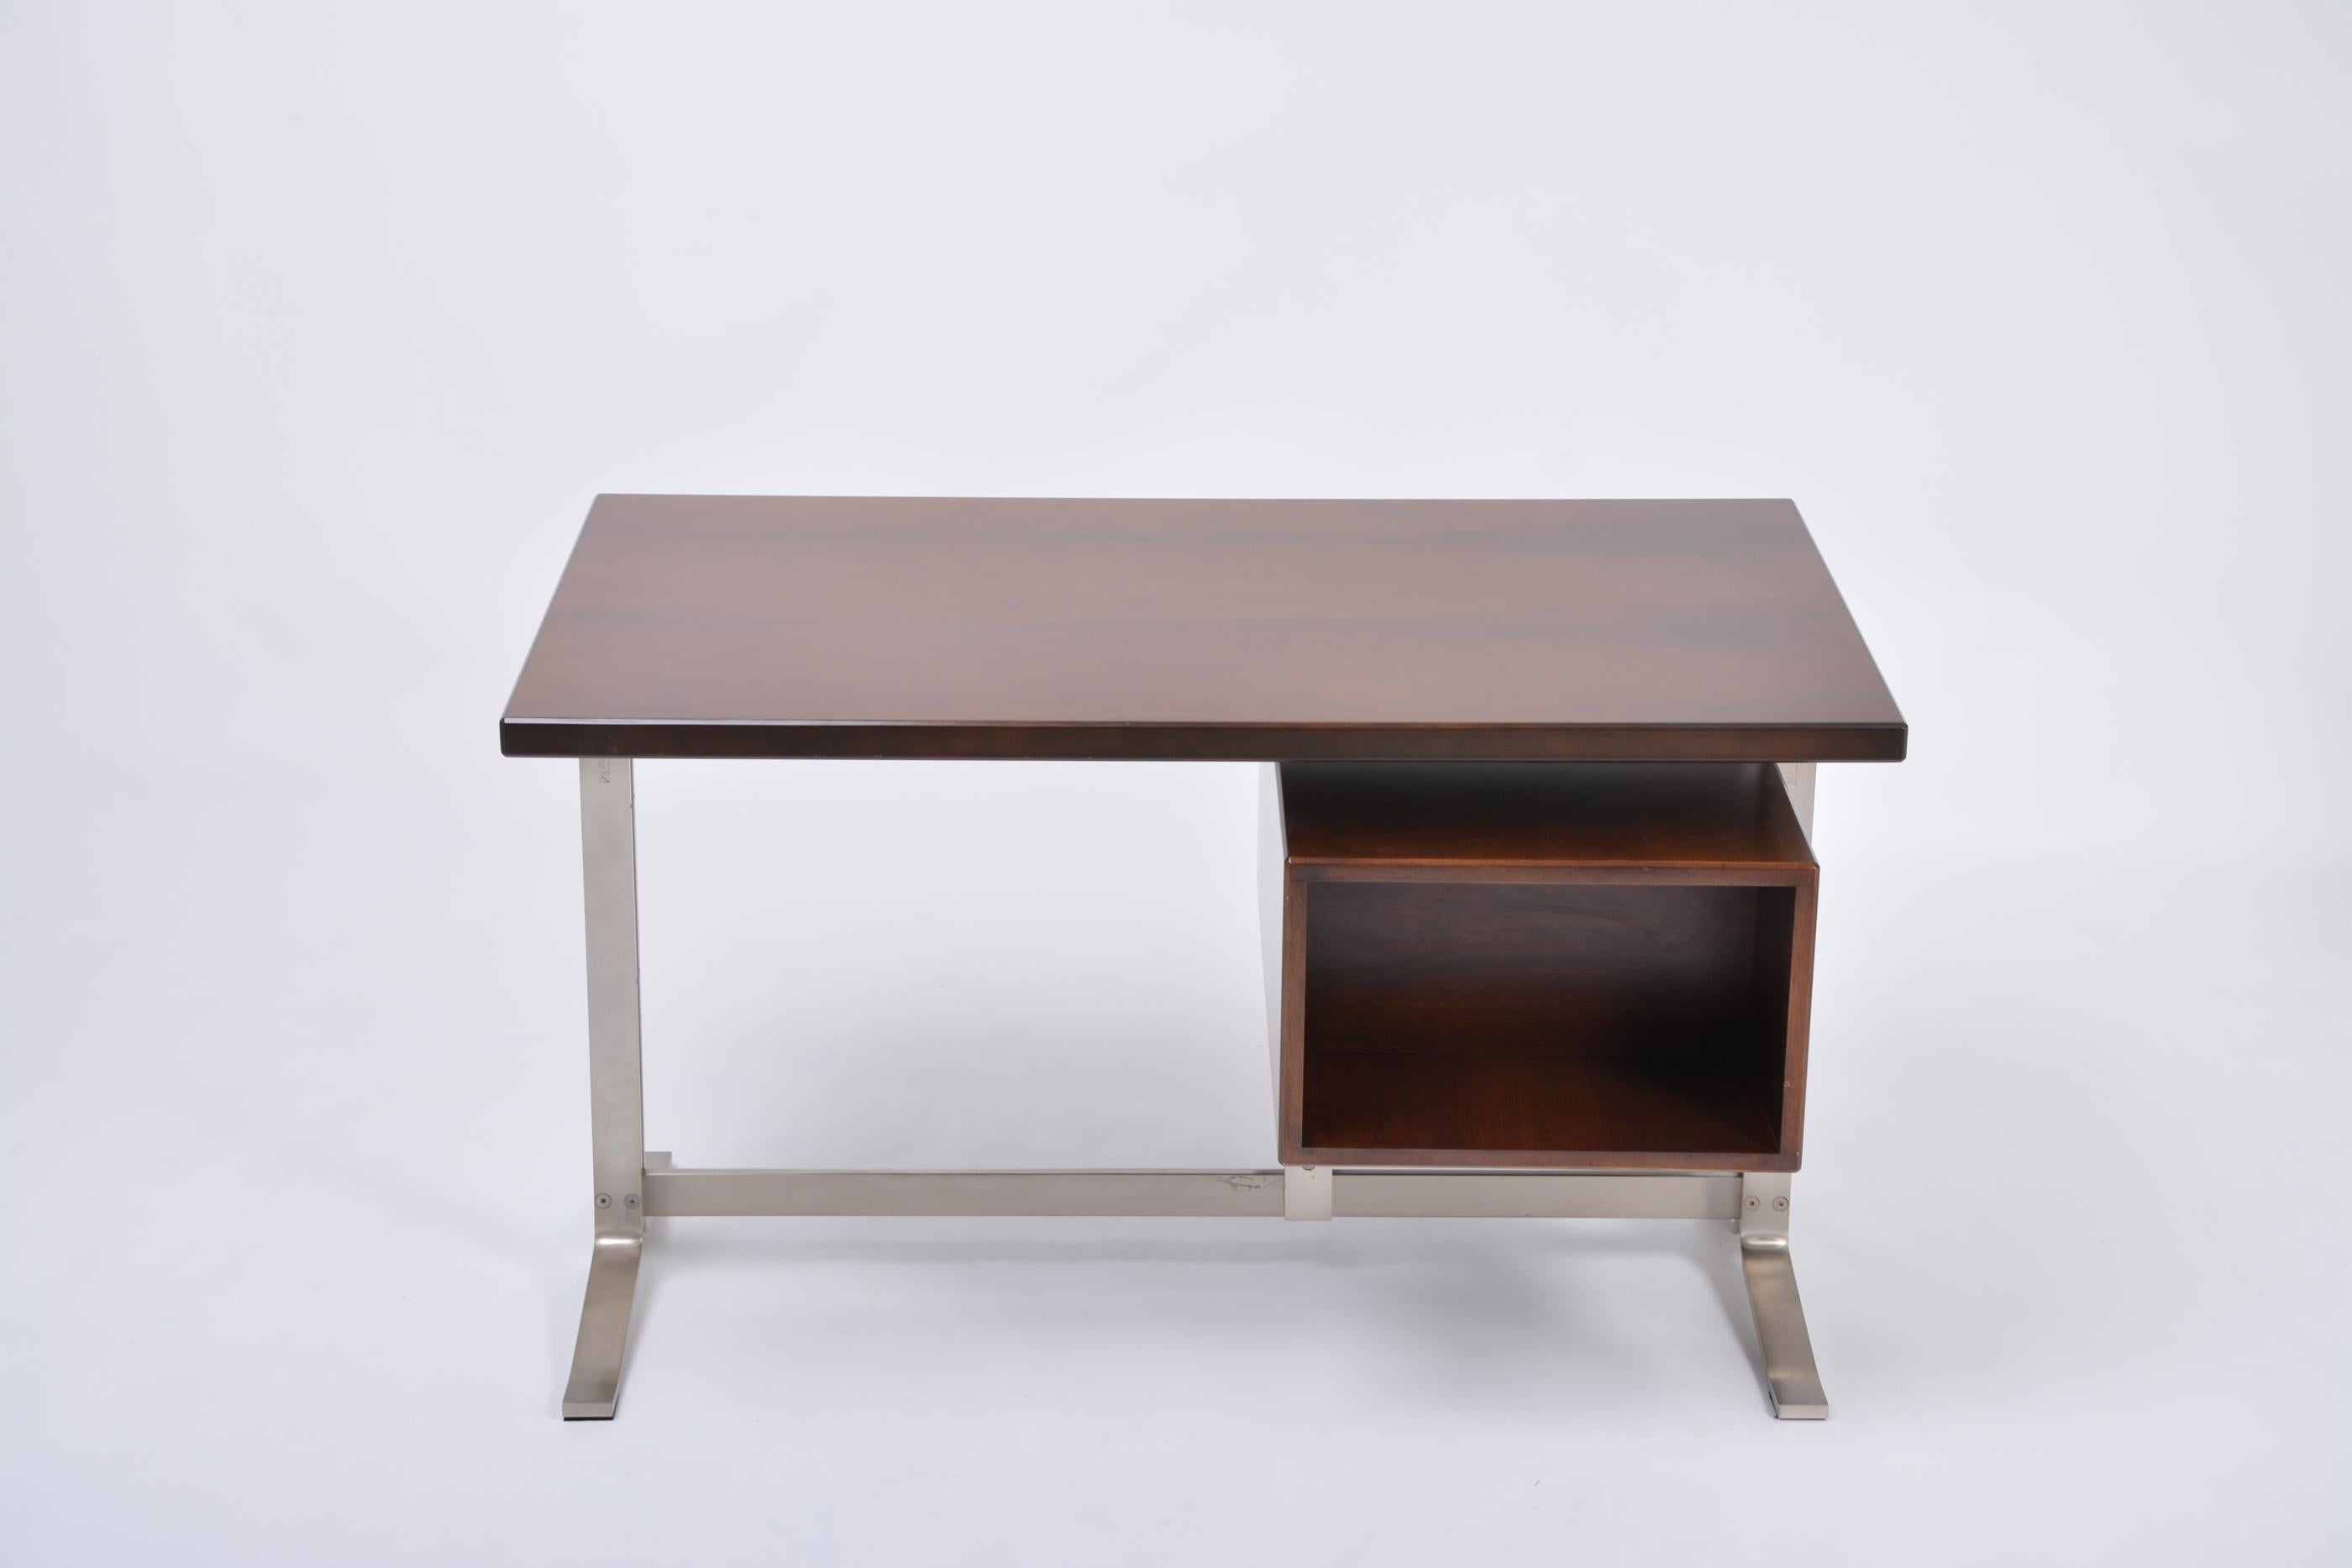 Gianni Moscatelli mahogany writing desk for Formanova

Beautiful writing desk designed by Gianni Moscatelli and produced by Italian company probably by the end of the 1970s. The desk features a top made of mahogany and a very heavy structure made of